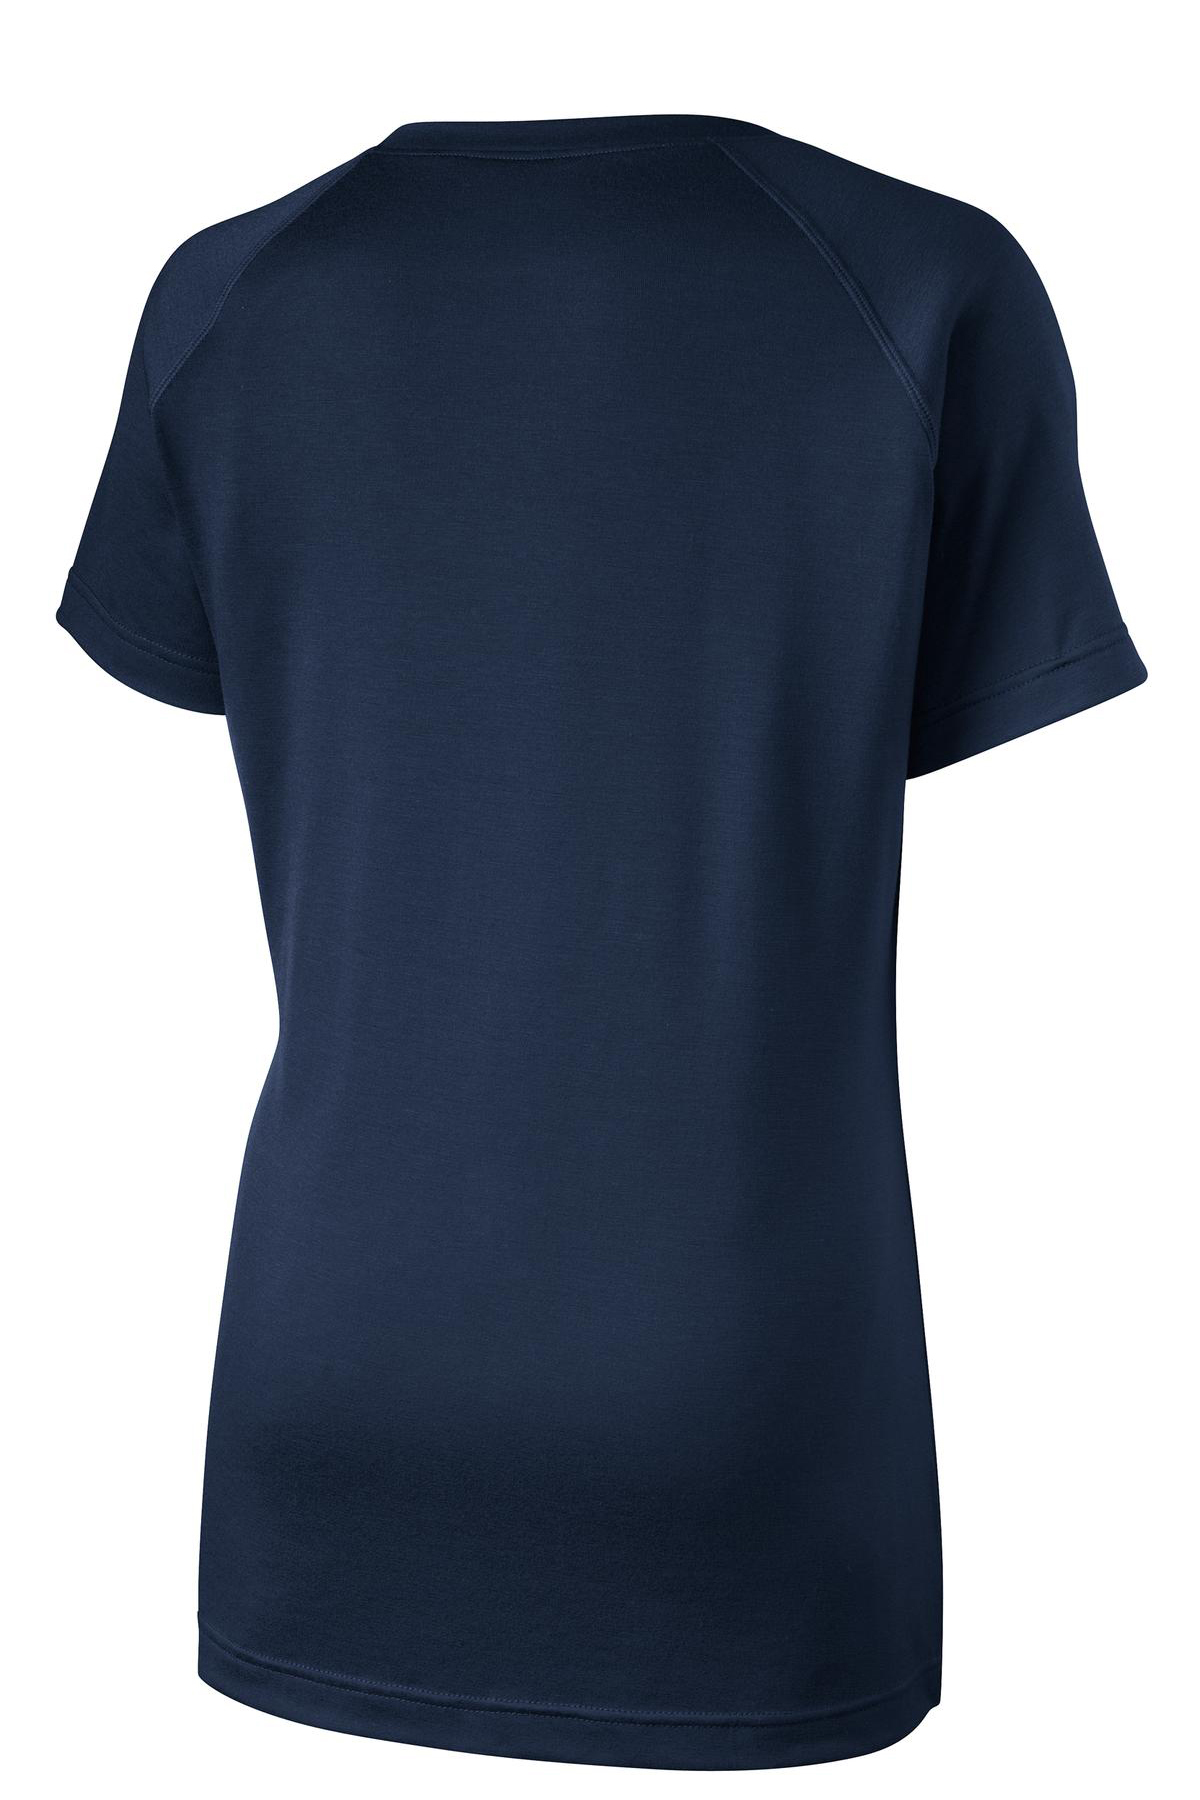 Sport-Tek Ladies Ultimate Performance V-Neck | Product | Company Casuals